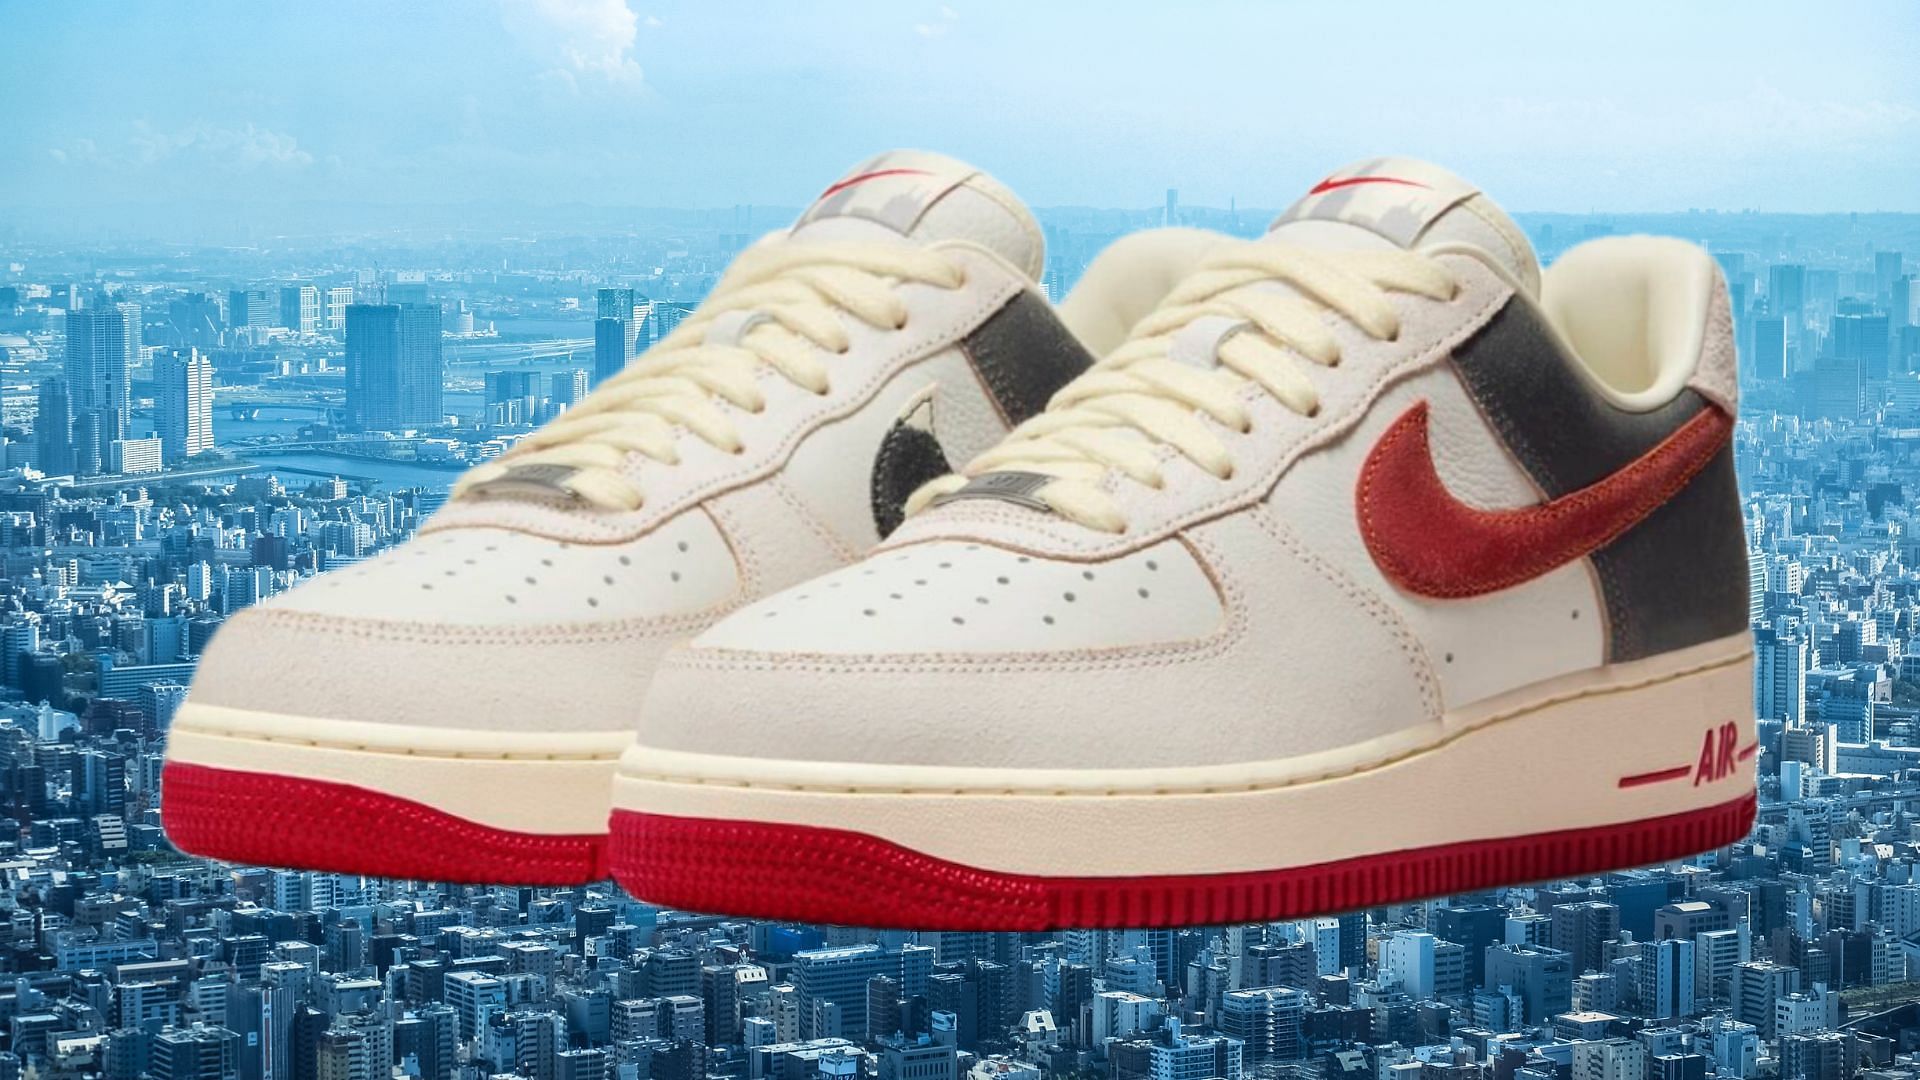 Chicago: Nike Air Force 1 Low “Chicago” shoes: Where to get